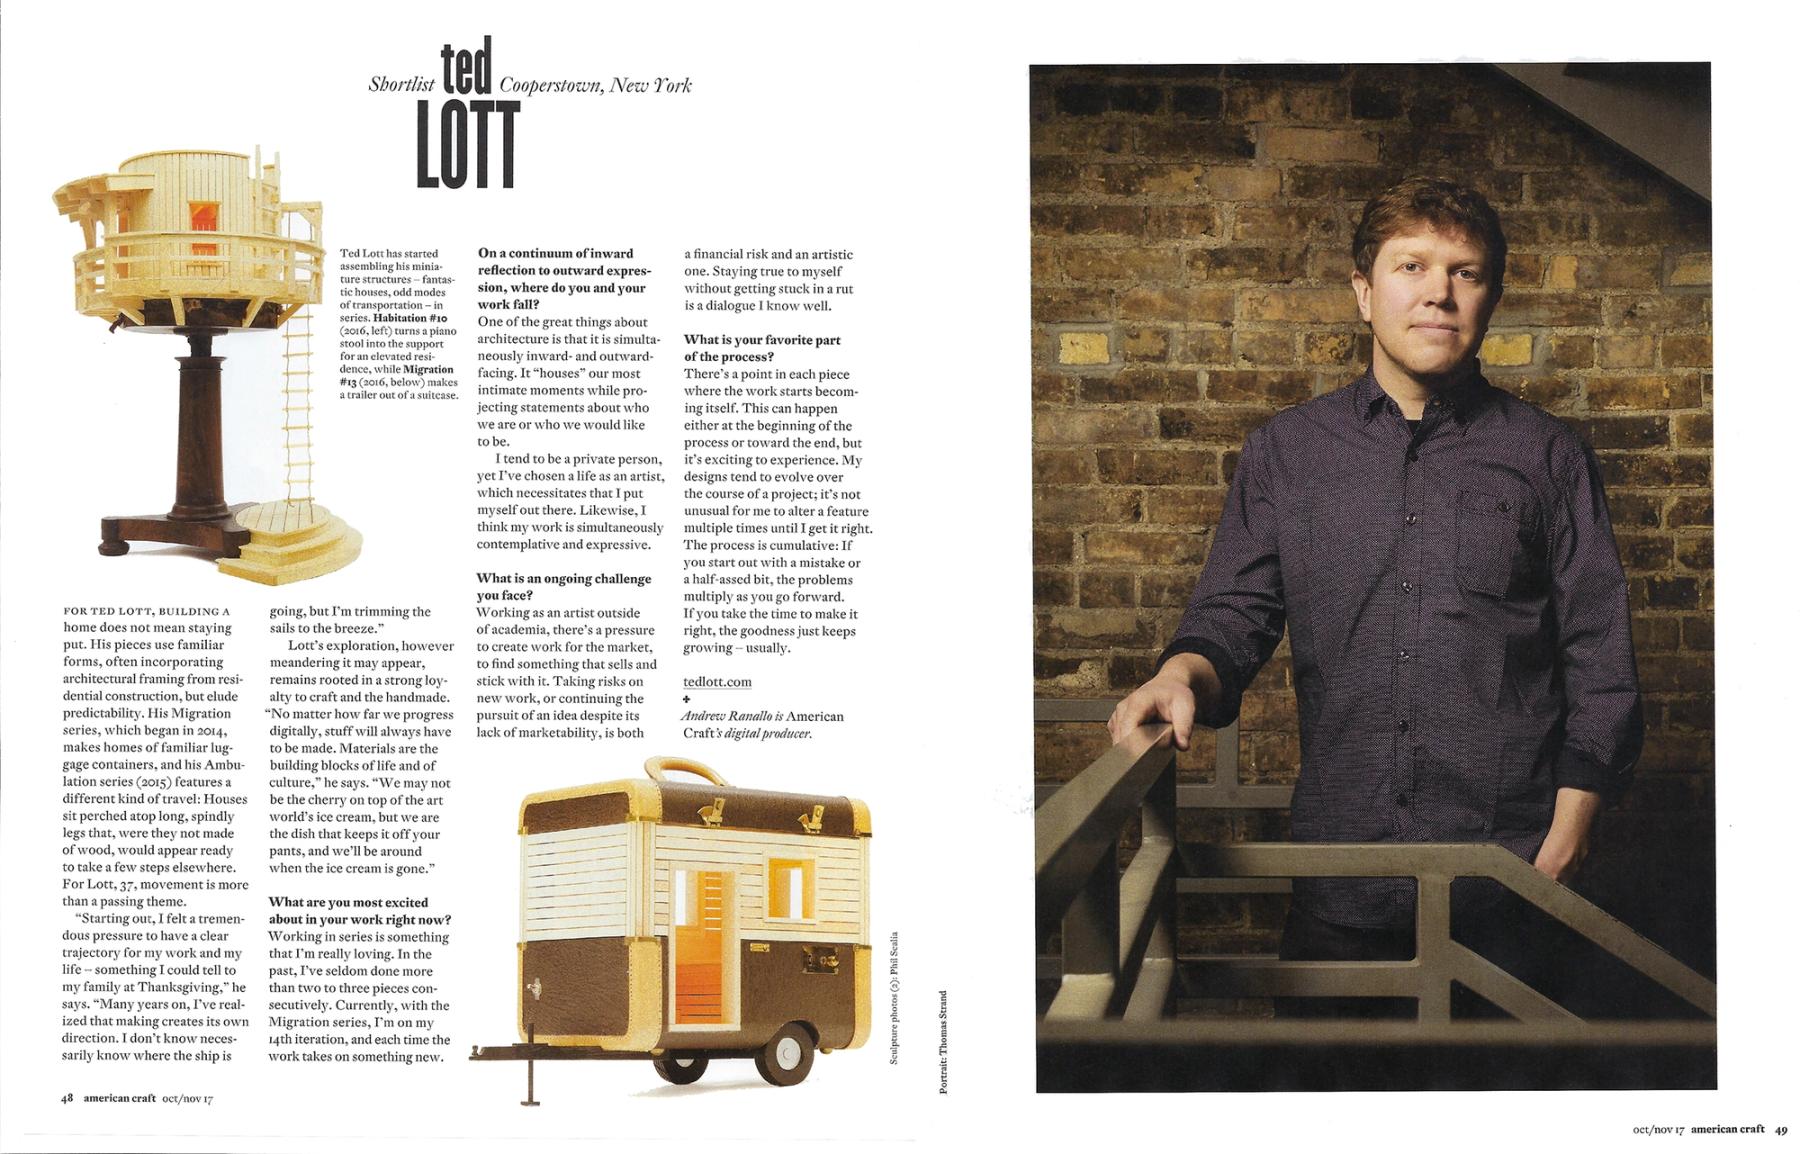 magazine spread with a photo of artist Ted Lott on one page and 4 columns of text and image of his work on the facing page